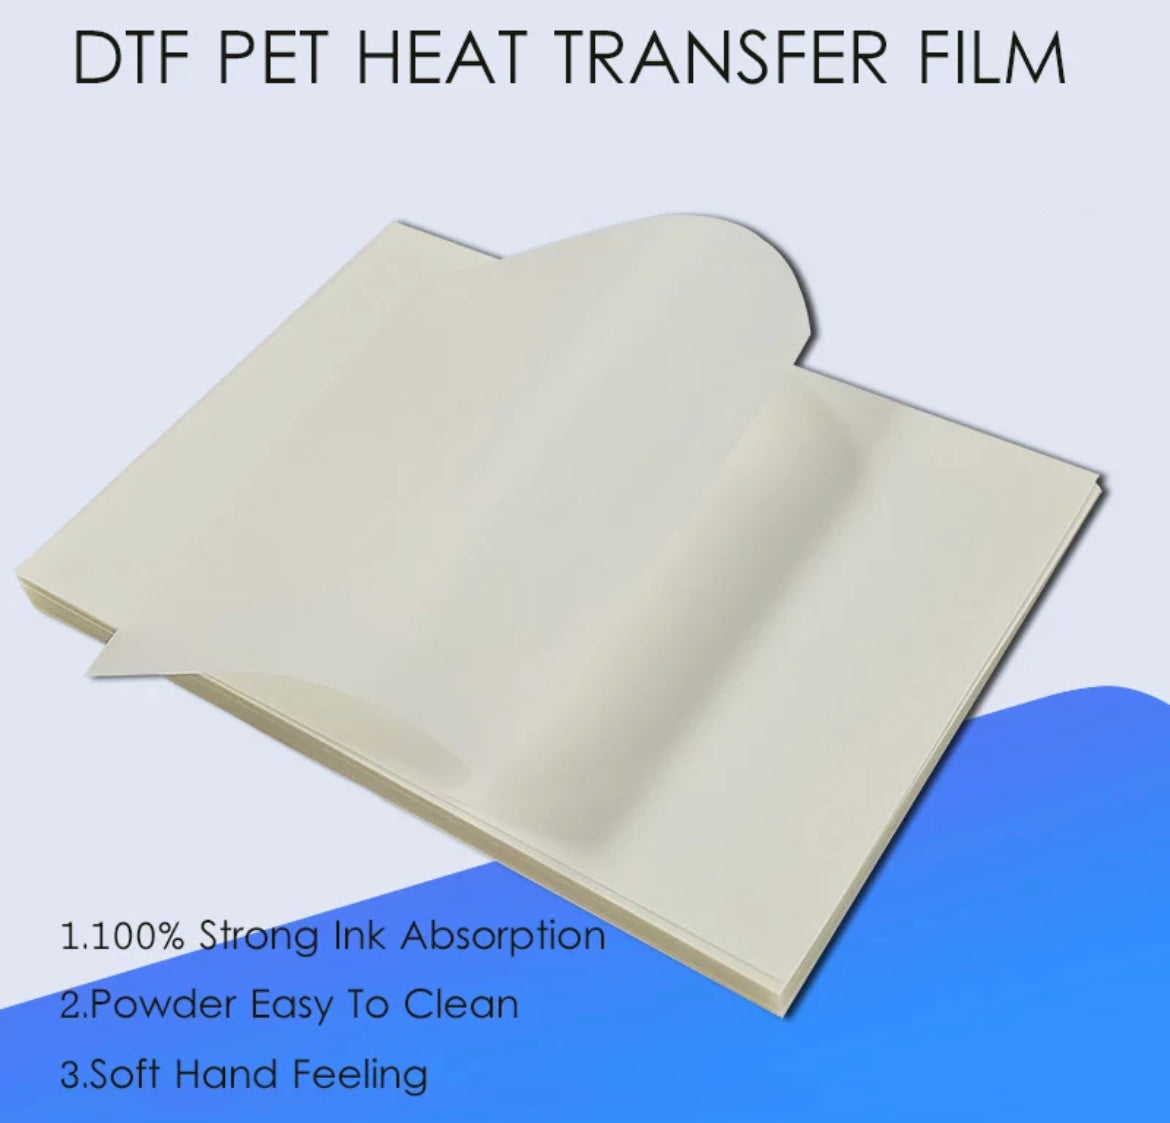 DTF Transfer Sheets By Size & Quantity